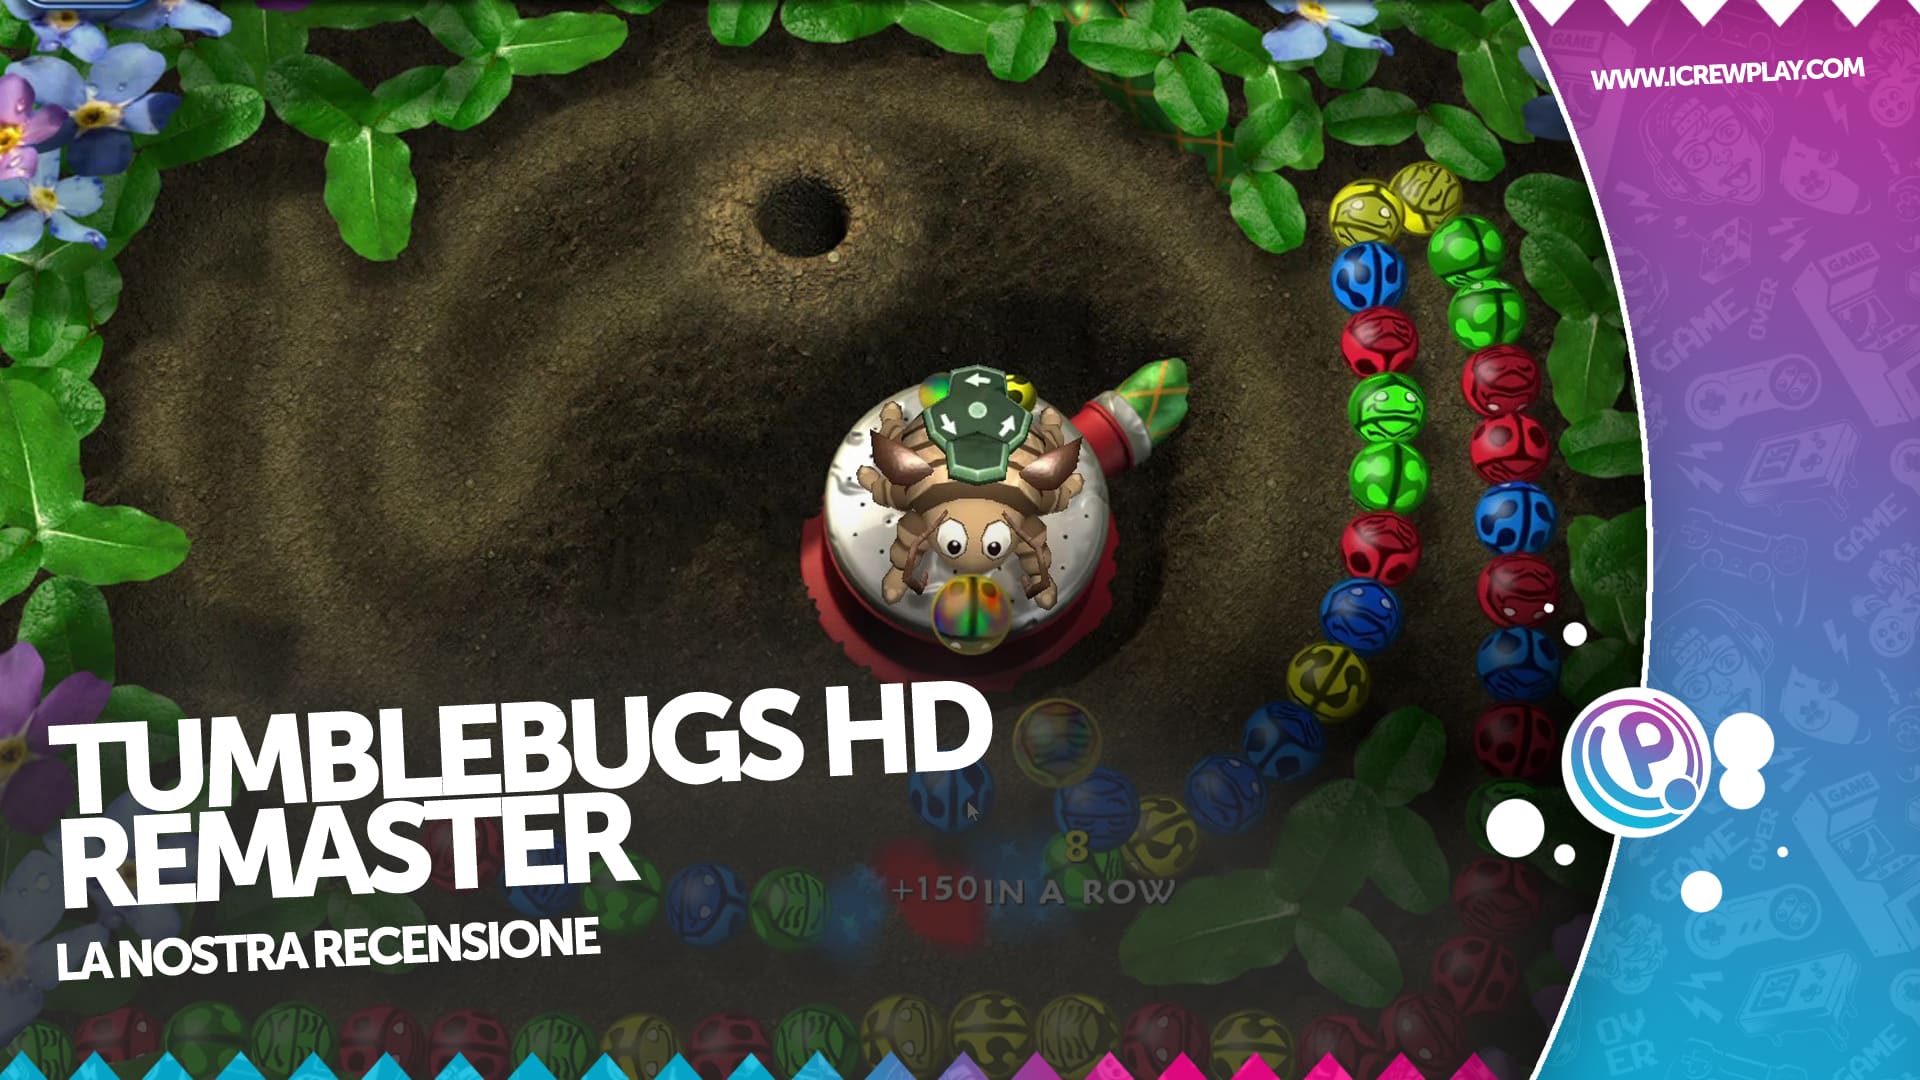 Tumblebugs HD Remaster cover recensione